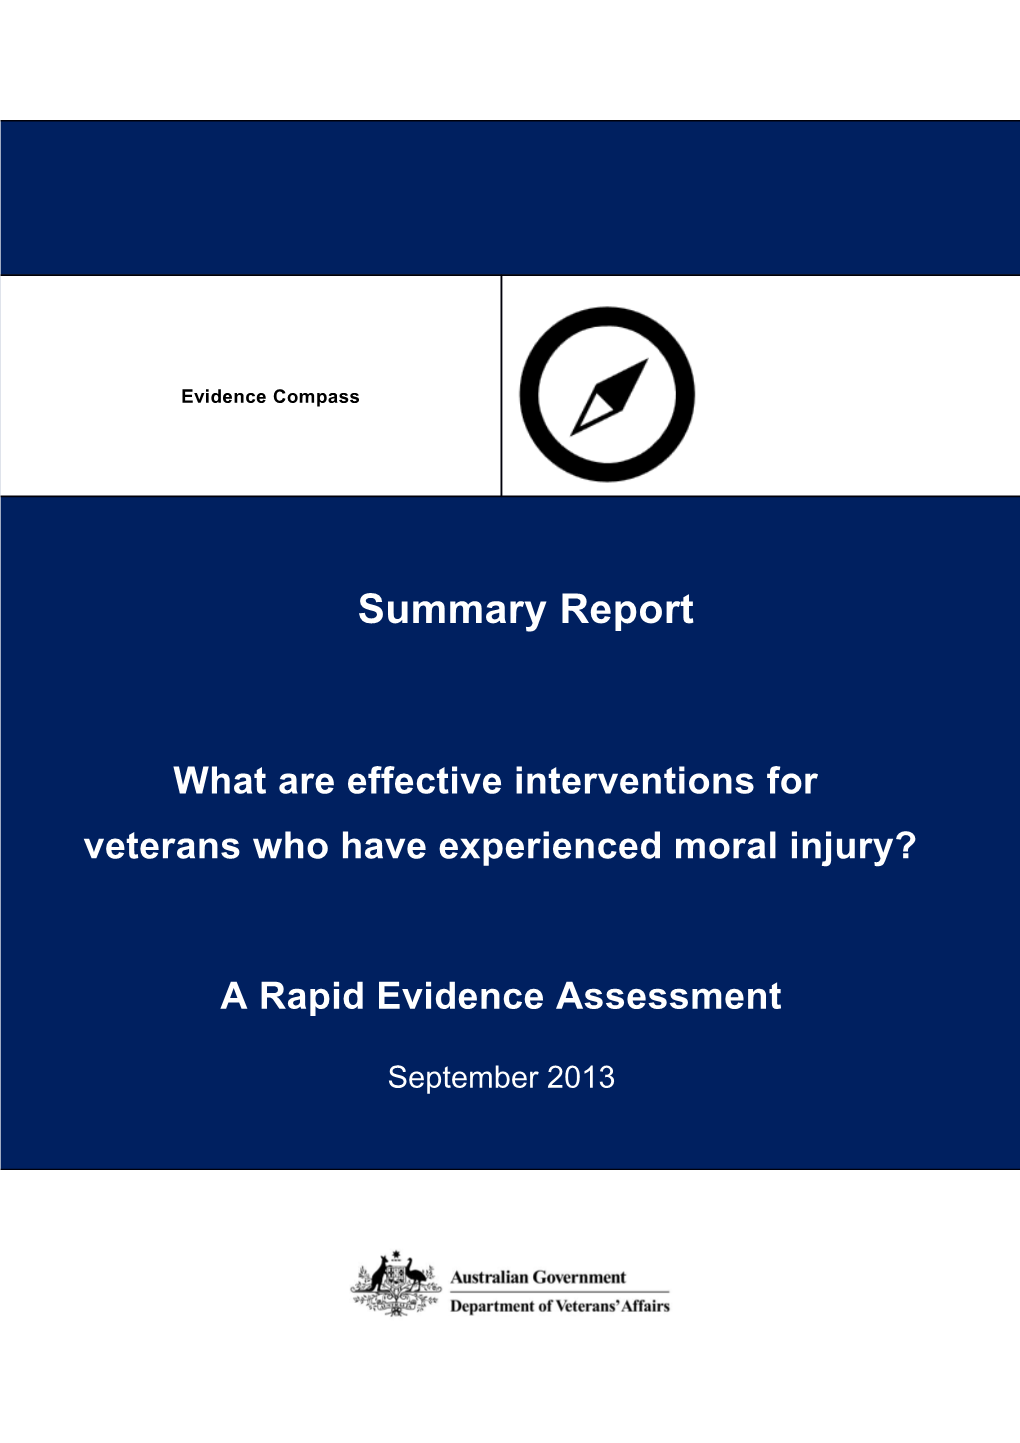 What Are Effective Interventions for Veterans Who Have Experienced Moral Injury?